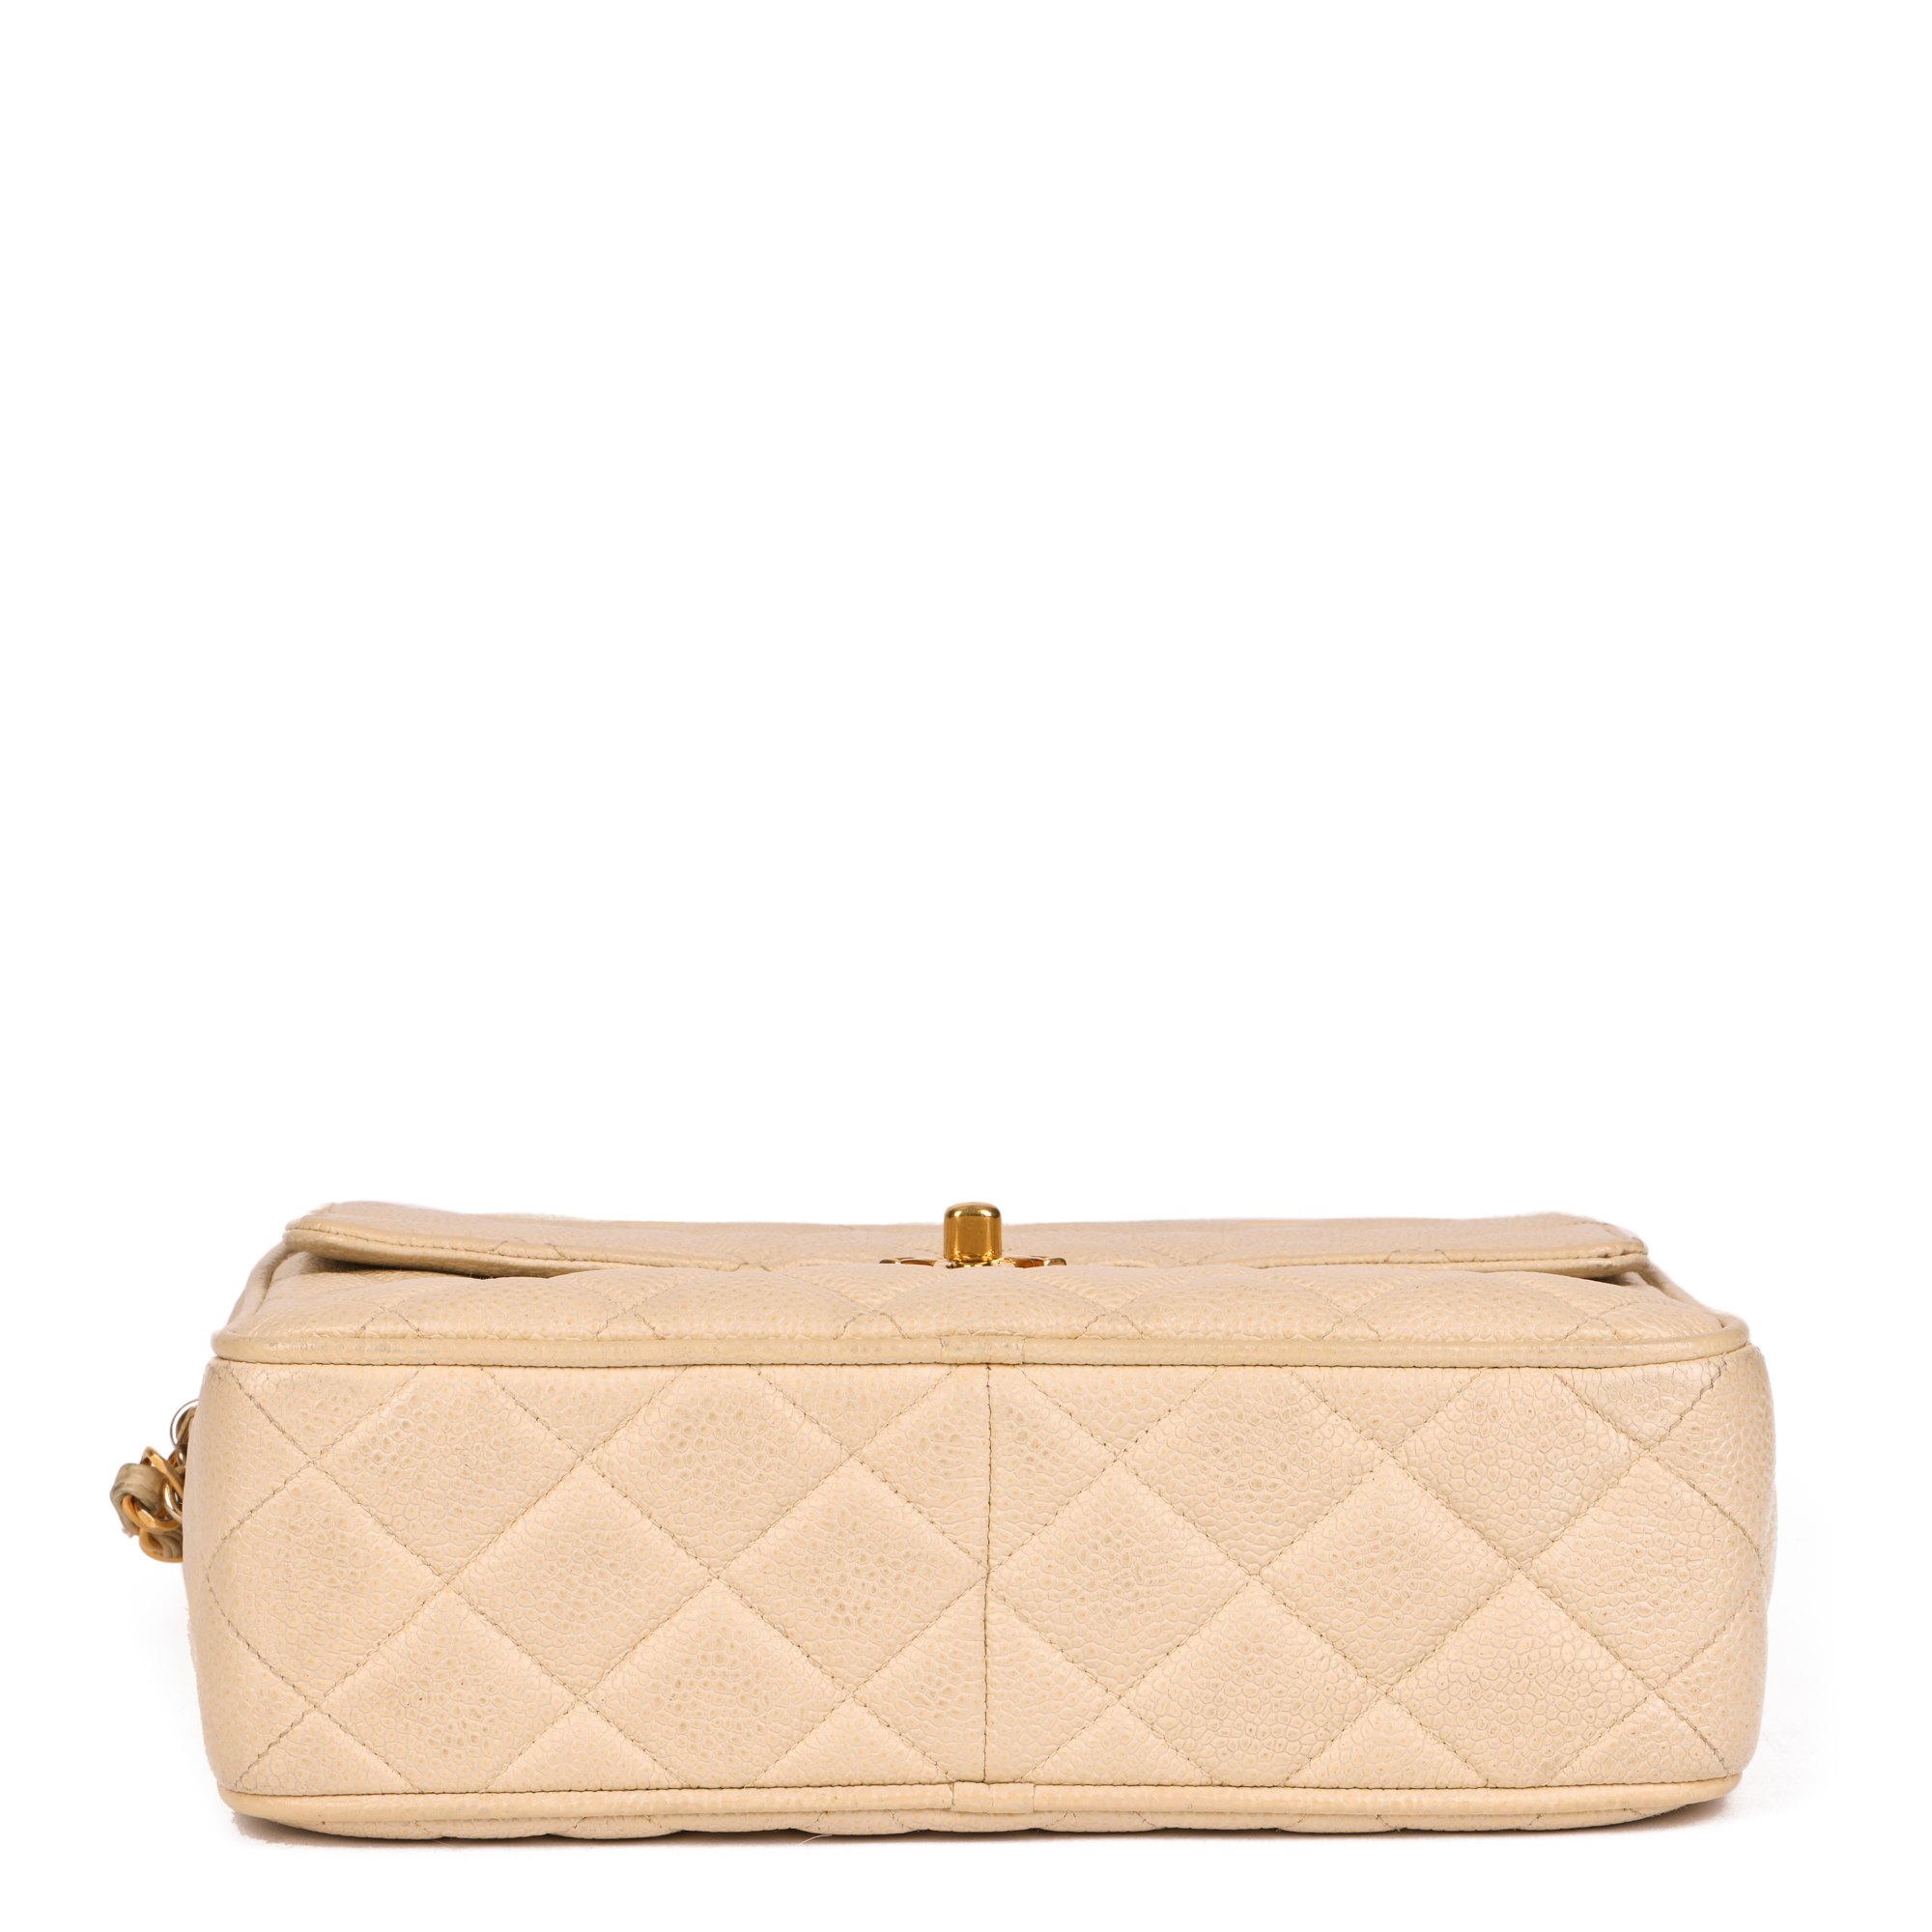 Chanel Beige Quilted Caviar Leather Vintage Small Classic Camera Bag